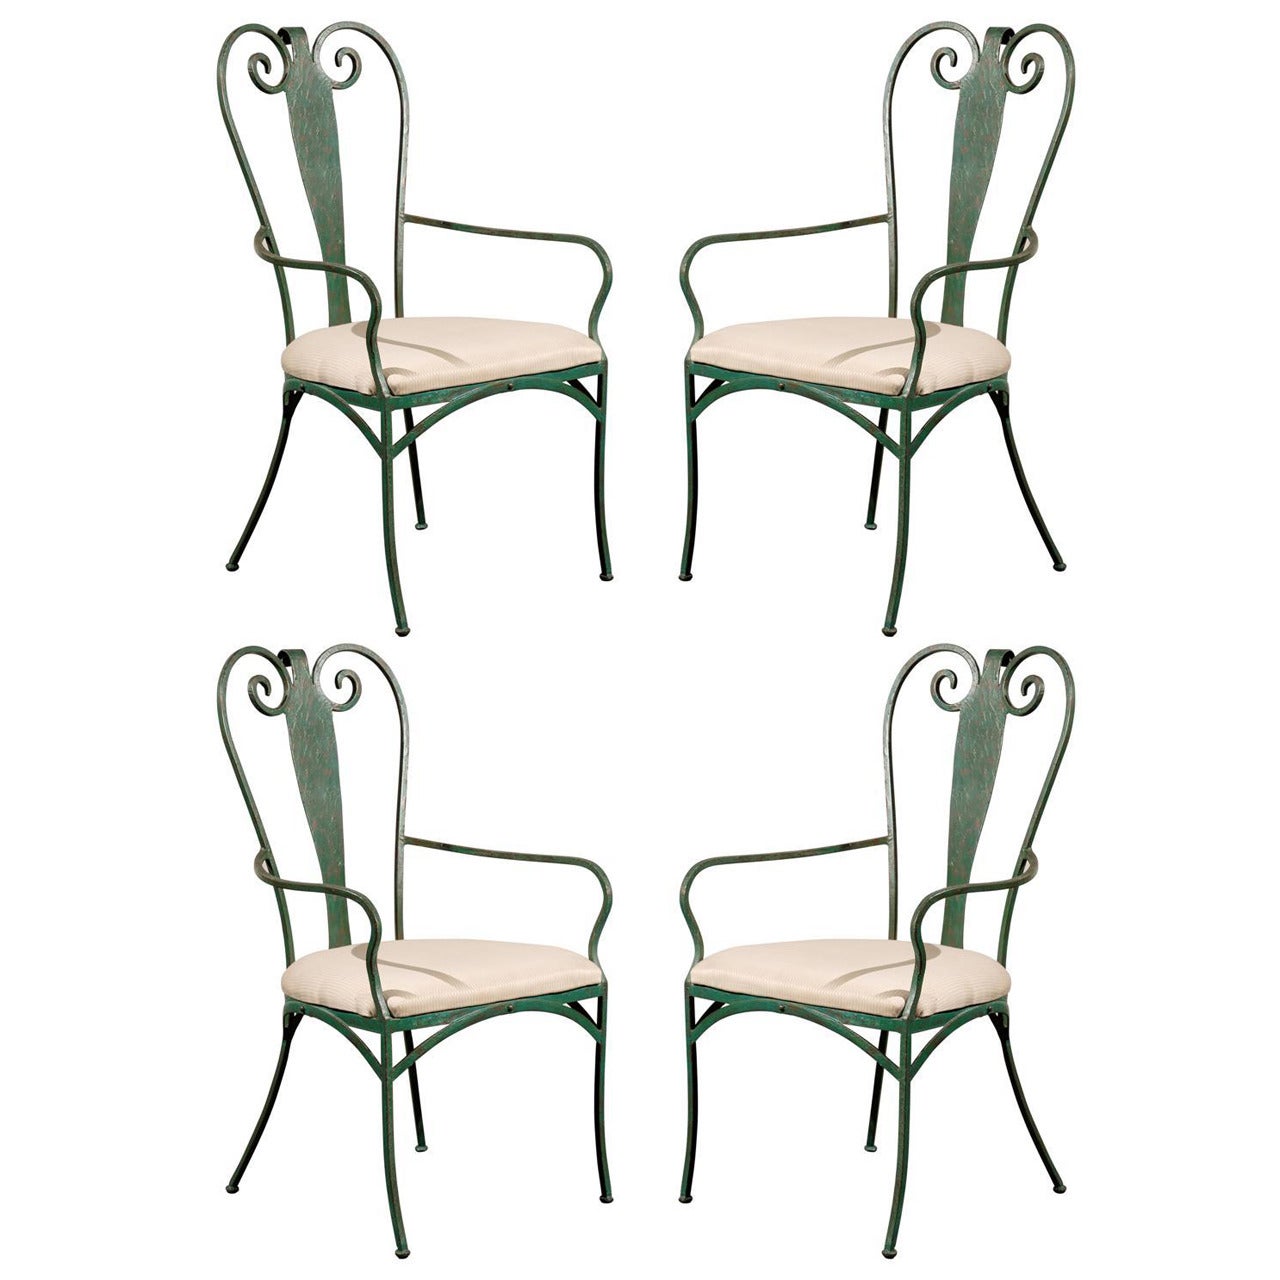 Set of Four 20th Century French Painted Iron Chairs